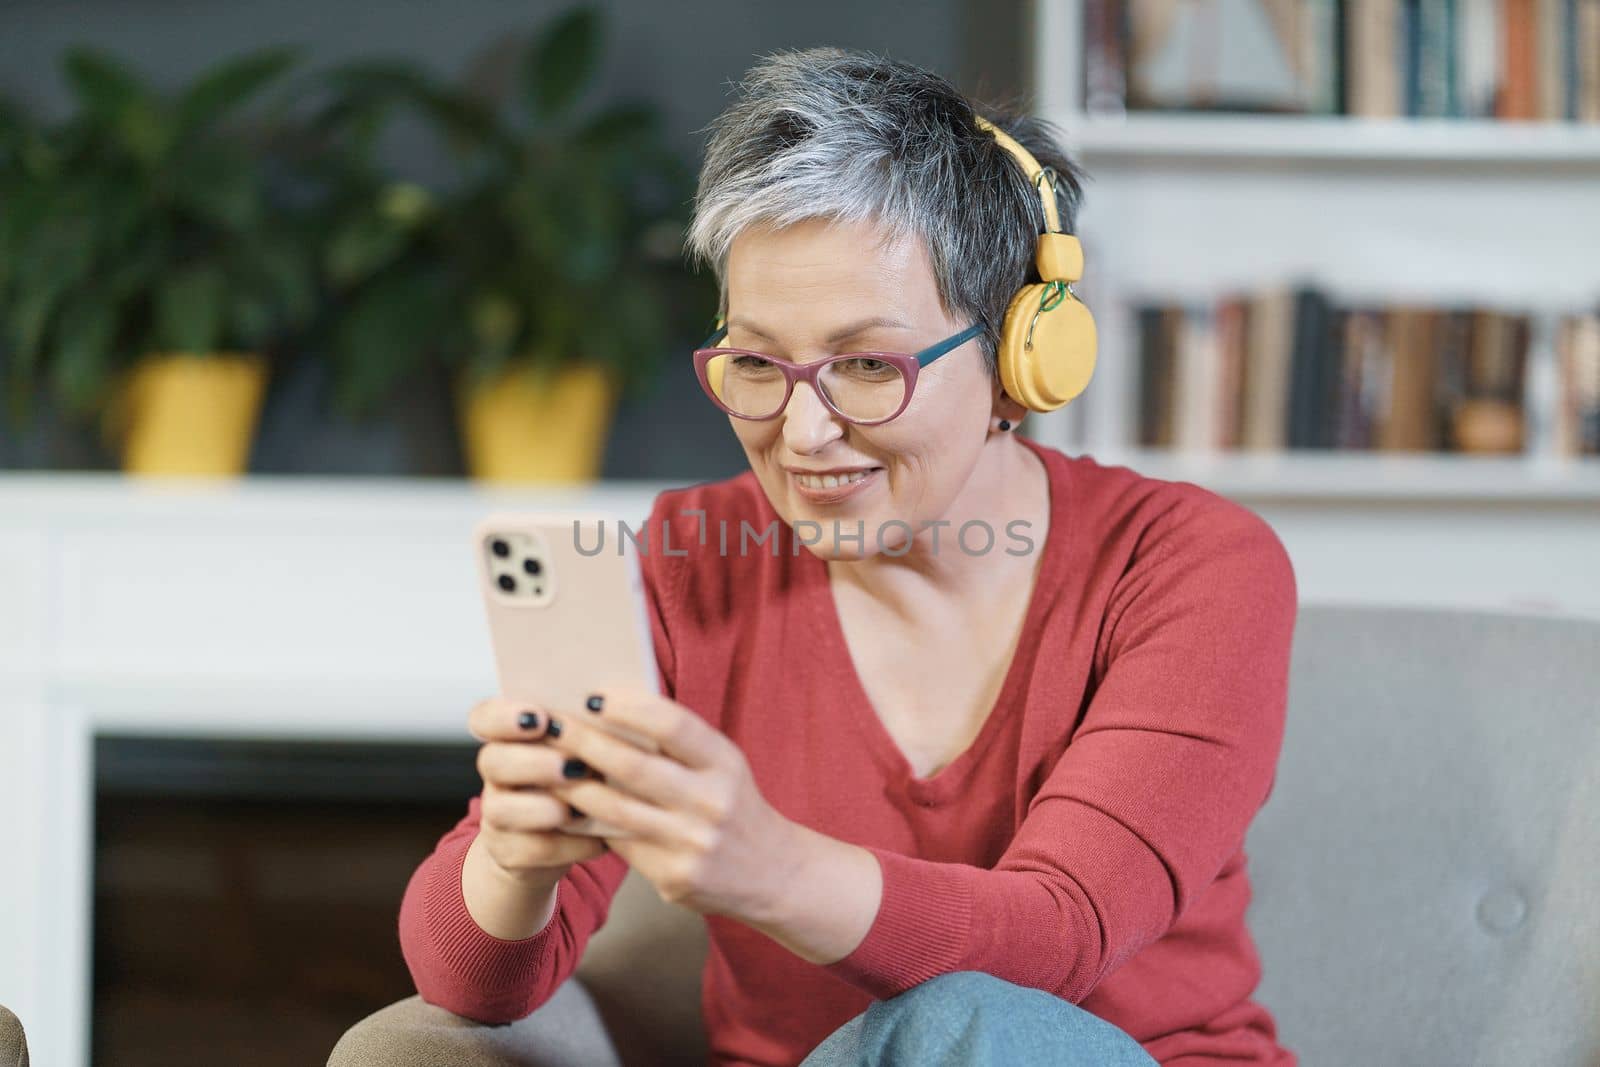 Mature woman wearing pink glasses and yellow headphones smiles while texting on her phone at home. The image depicts technology, communication, and leisure, while the woman's happy expression reflects her enjoyment and satisfaction with digital messaging.